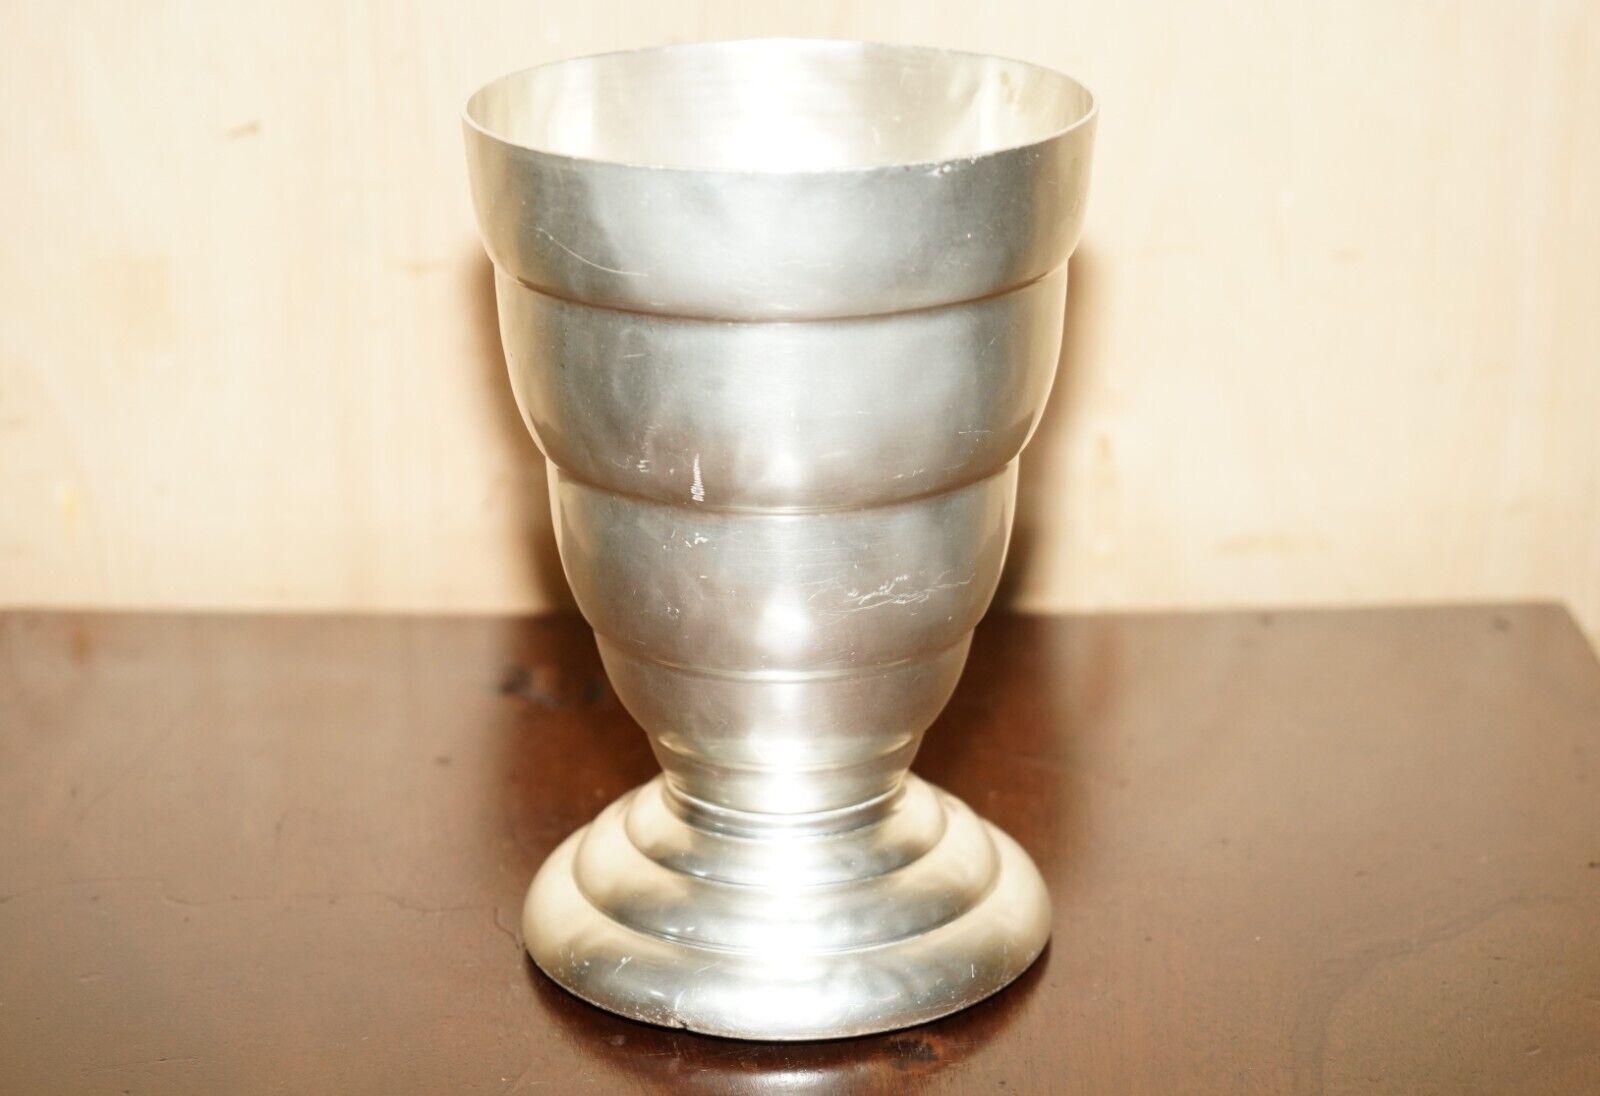 Royal House Antiques

Royal House Antiques is delighted to offer for sale this lovely Art Deco Circa 1930's Silver Plated Champagne bucket which can of course be used for wine and ice as well

A good looking and well made, decorative example, the